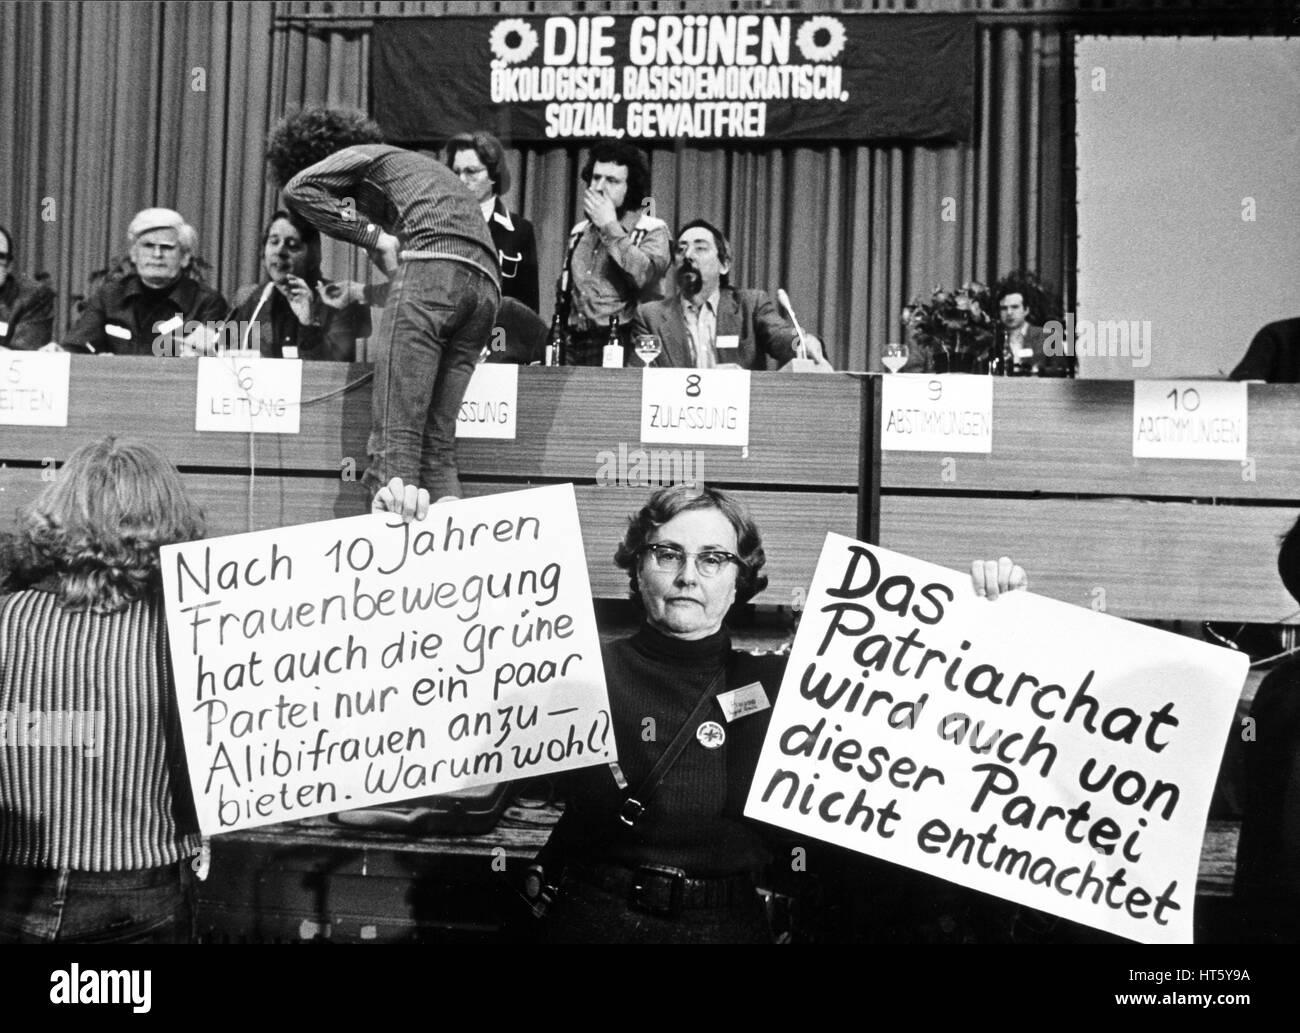 Karlsruhe, Germany 12.01.1980 - Feminists protest at the founding Party Congress of the derman Green Party (Die Gruenen) in Karlsruhe Stock Photo